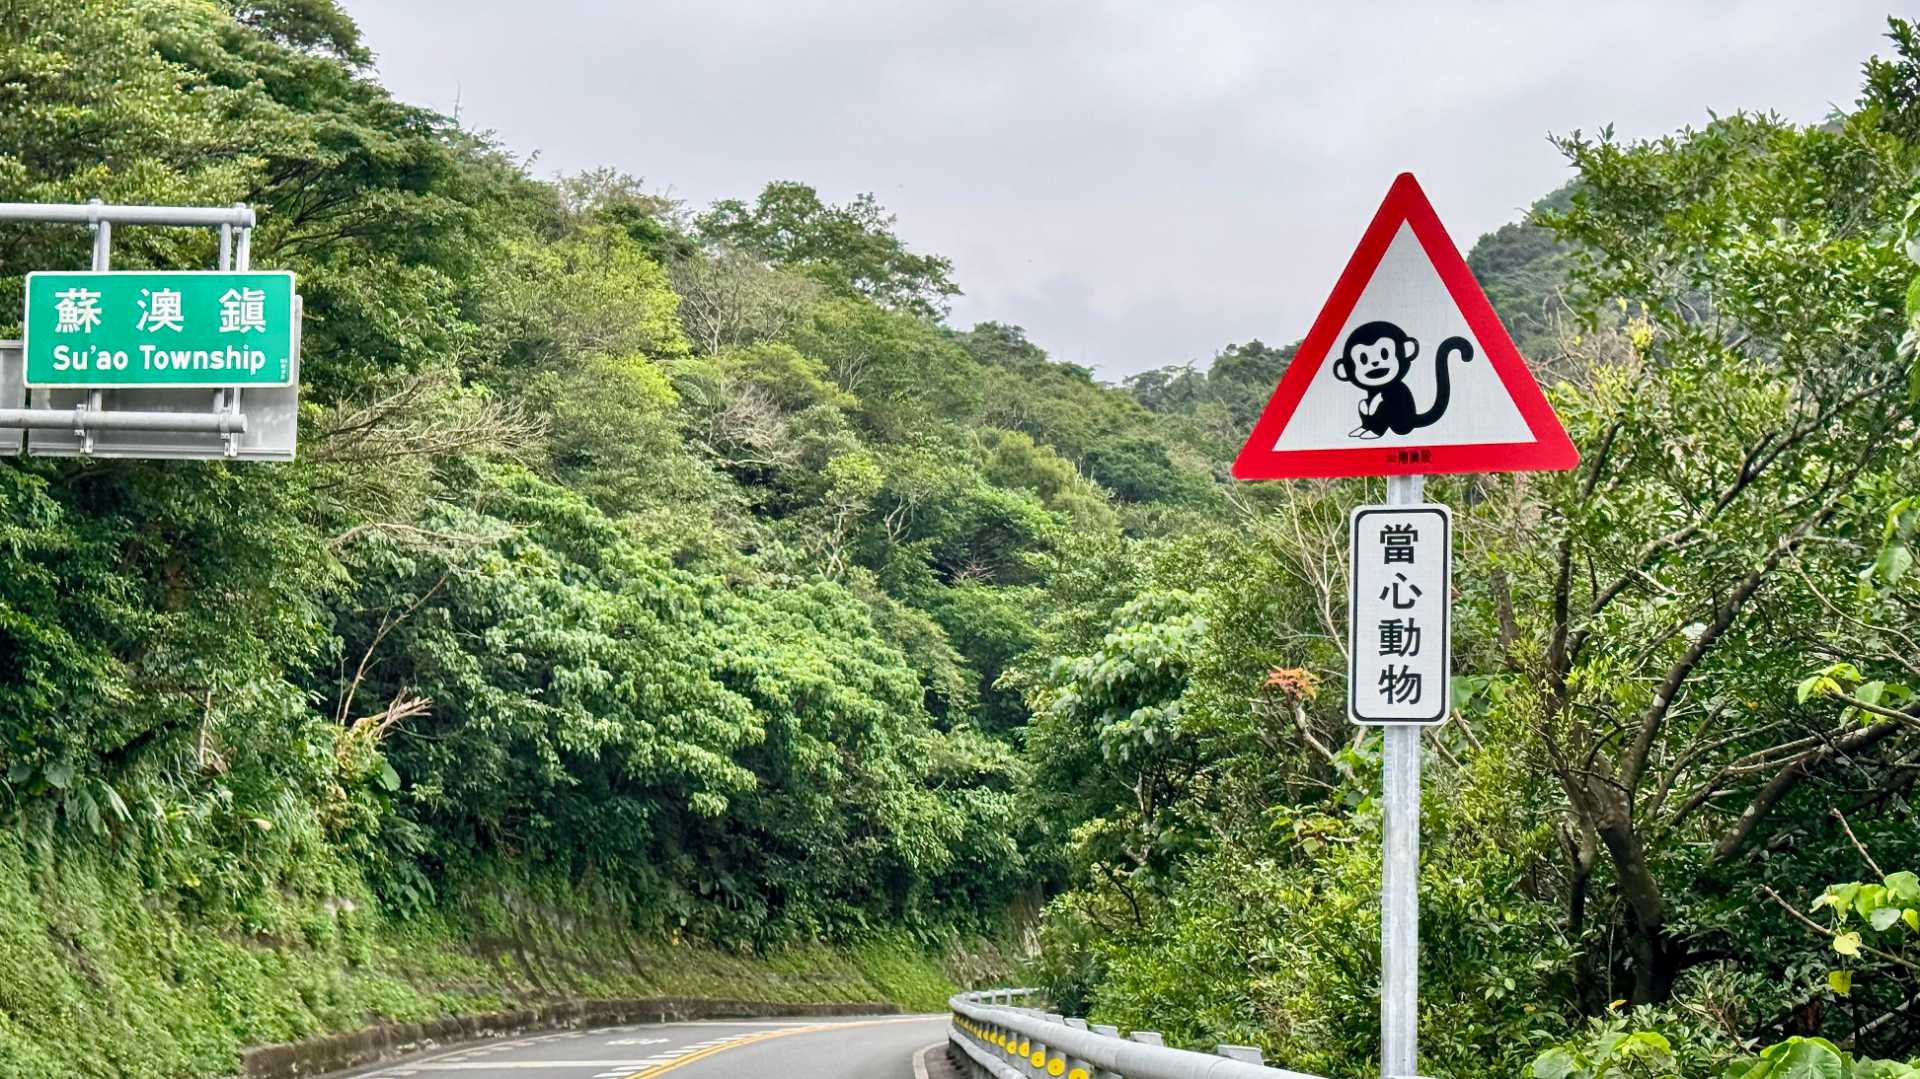 A roadsign showing a monkey.